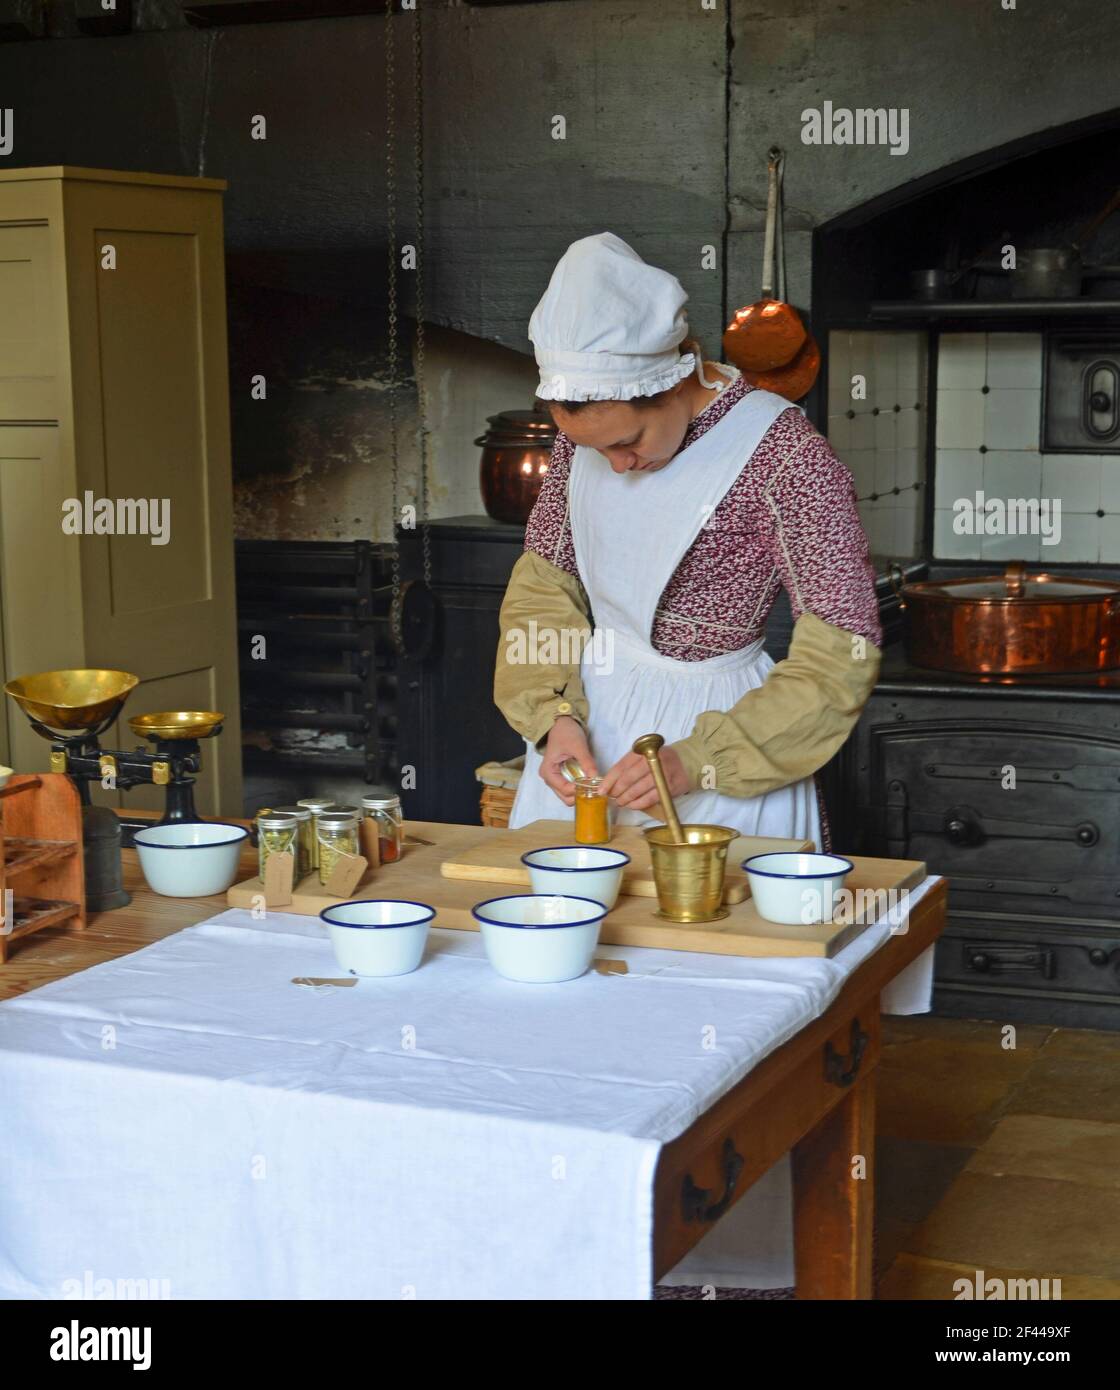 https://c8.alamy.com/comp/2F449XF/victorian-kitchen-with-woman-dressed-as-victorian-kitchen-maid-working-2F449XF.jpg